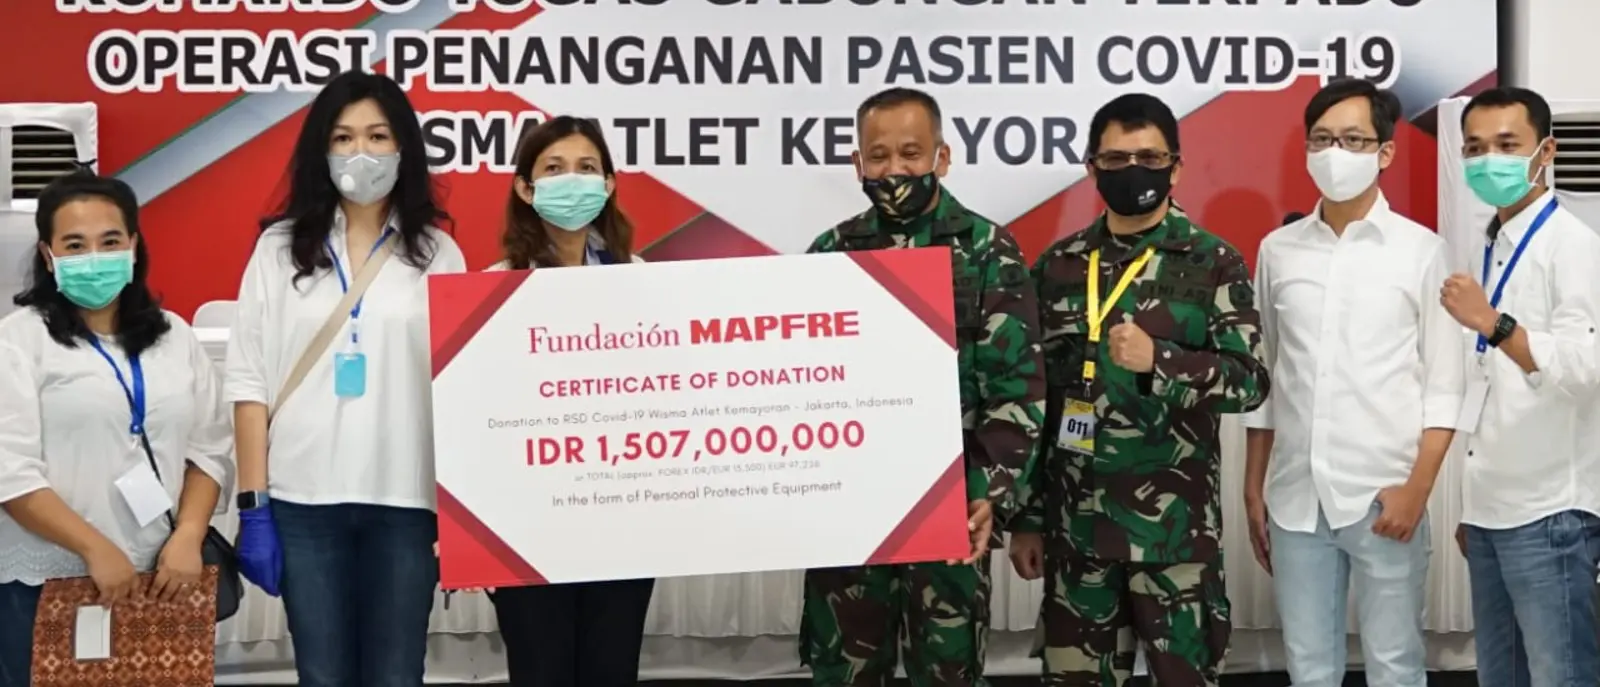 Indonesia: PPE donation to protect medical and first responders at Wisma Atlet Kemayoran